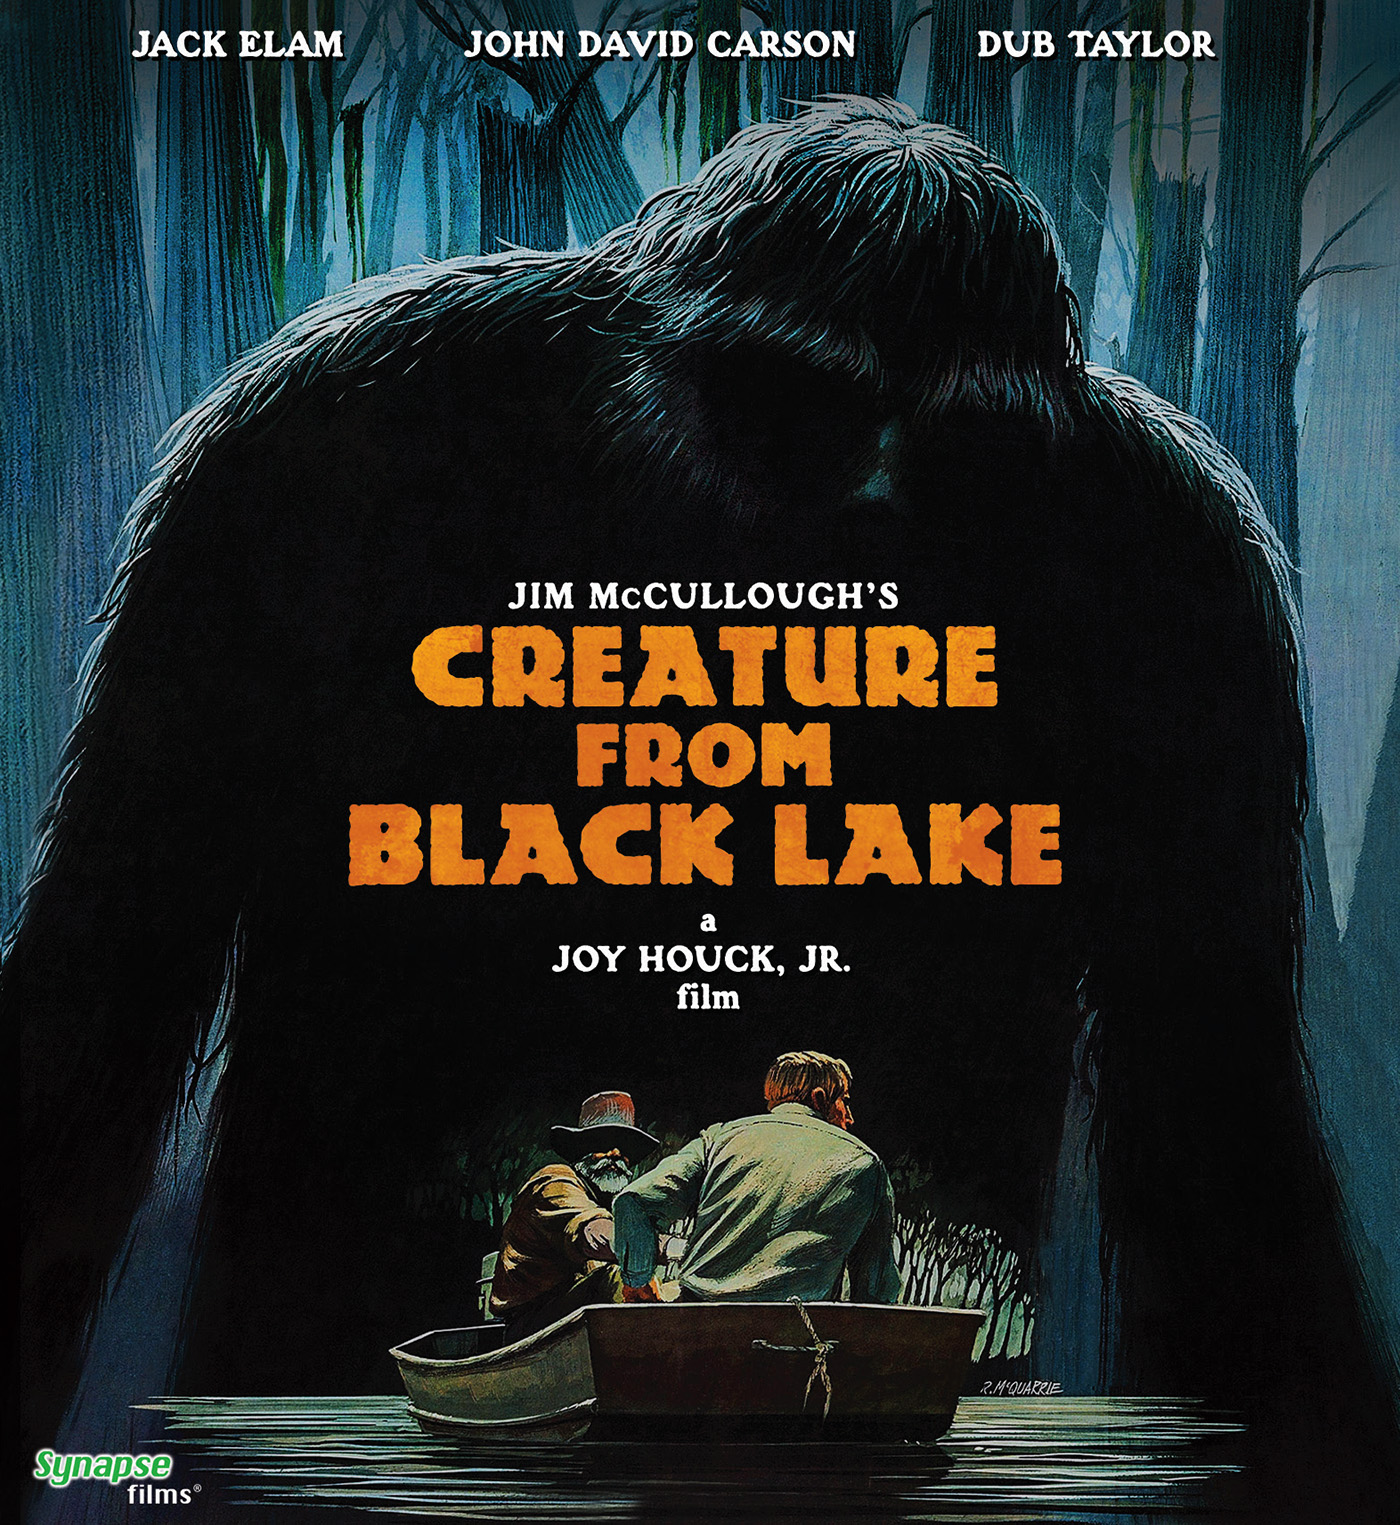 

The Creature from Black Lake [Blu-ray] [1976]